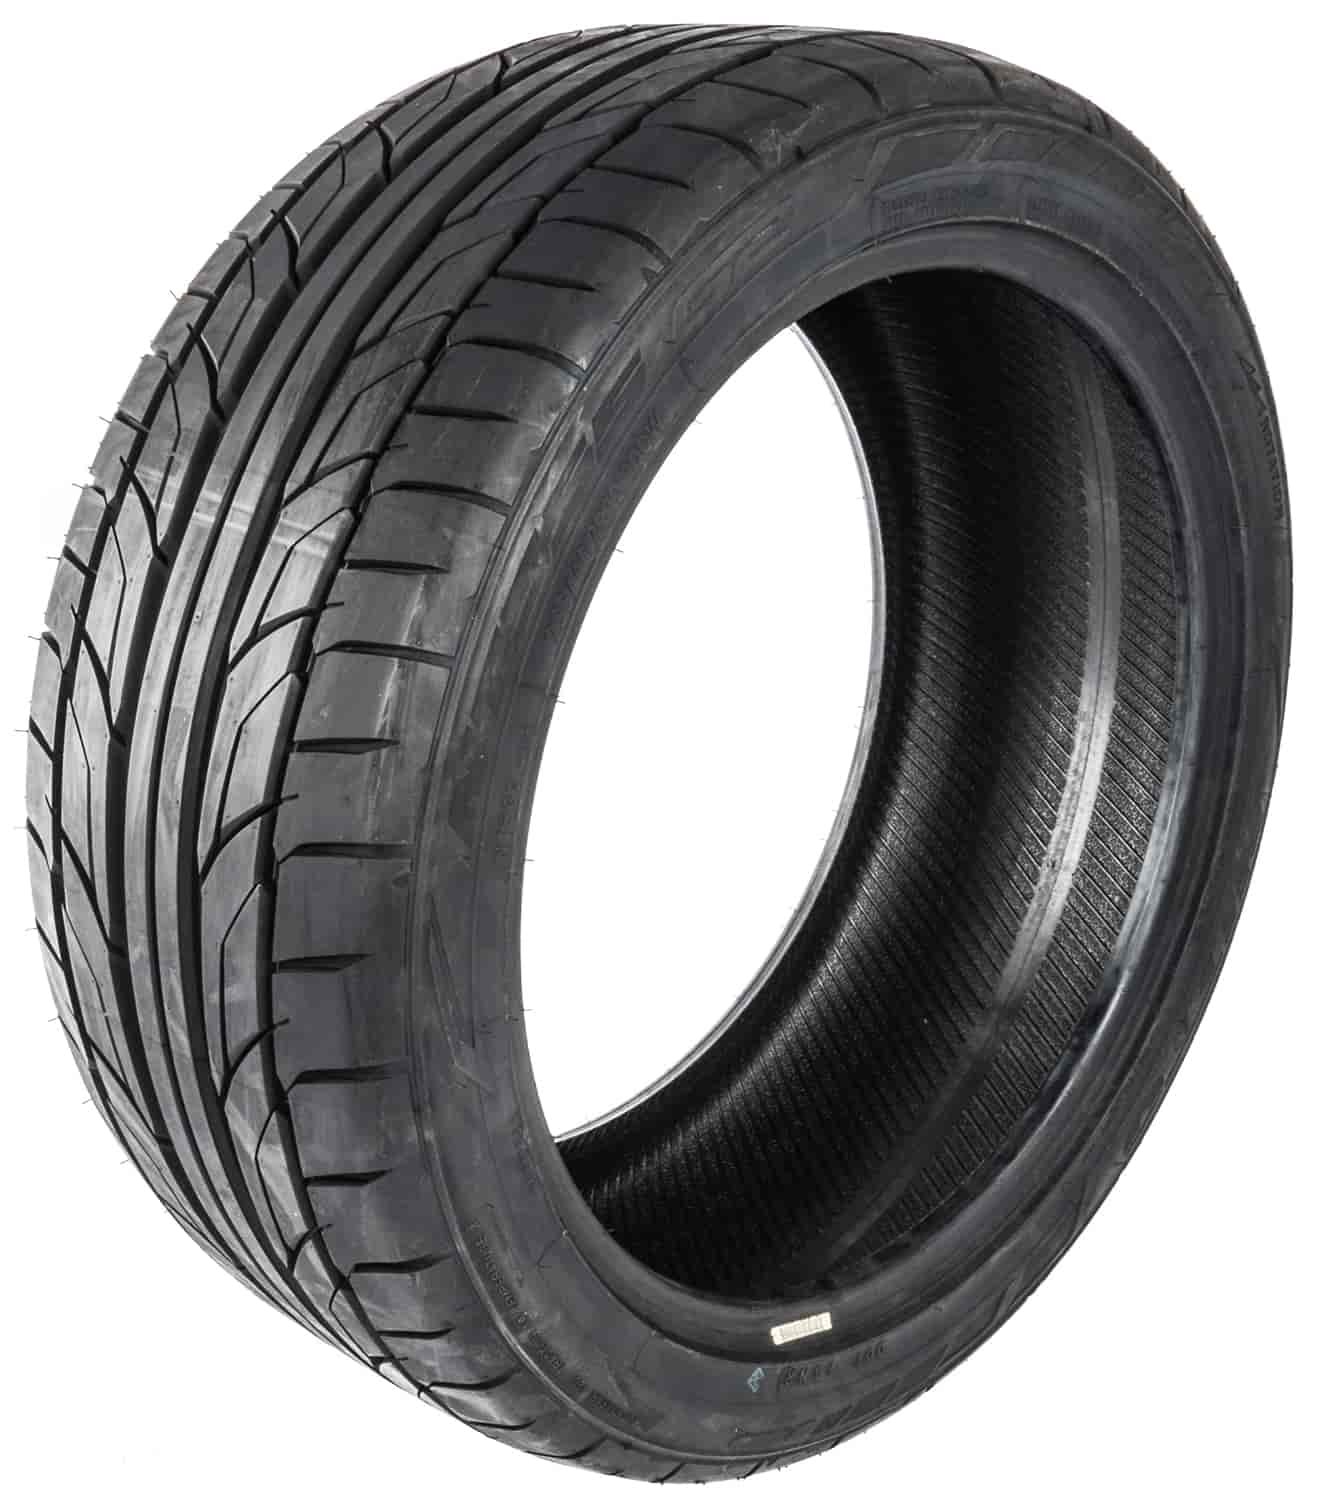 NT555 G2 Summer UHP Radial Tire 255/40R19